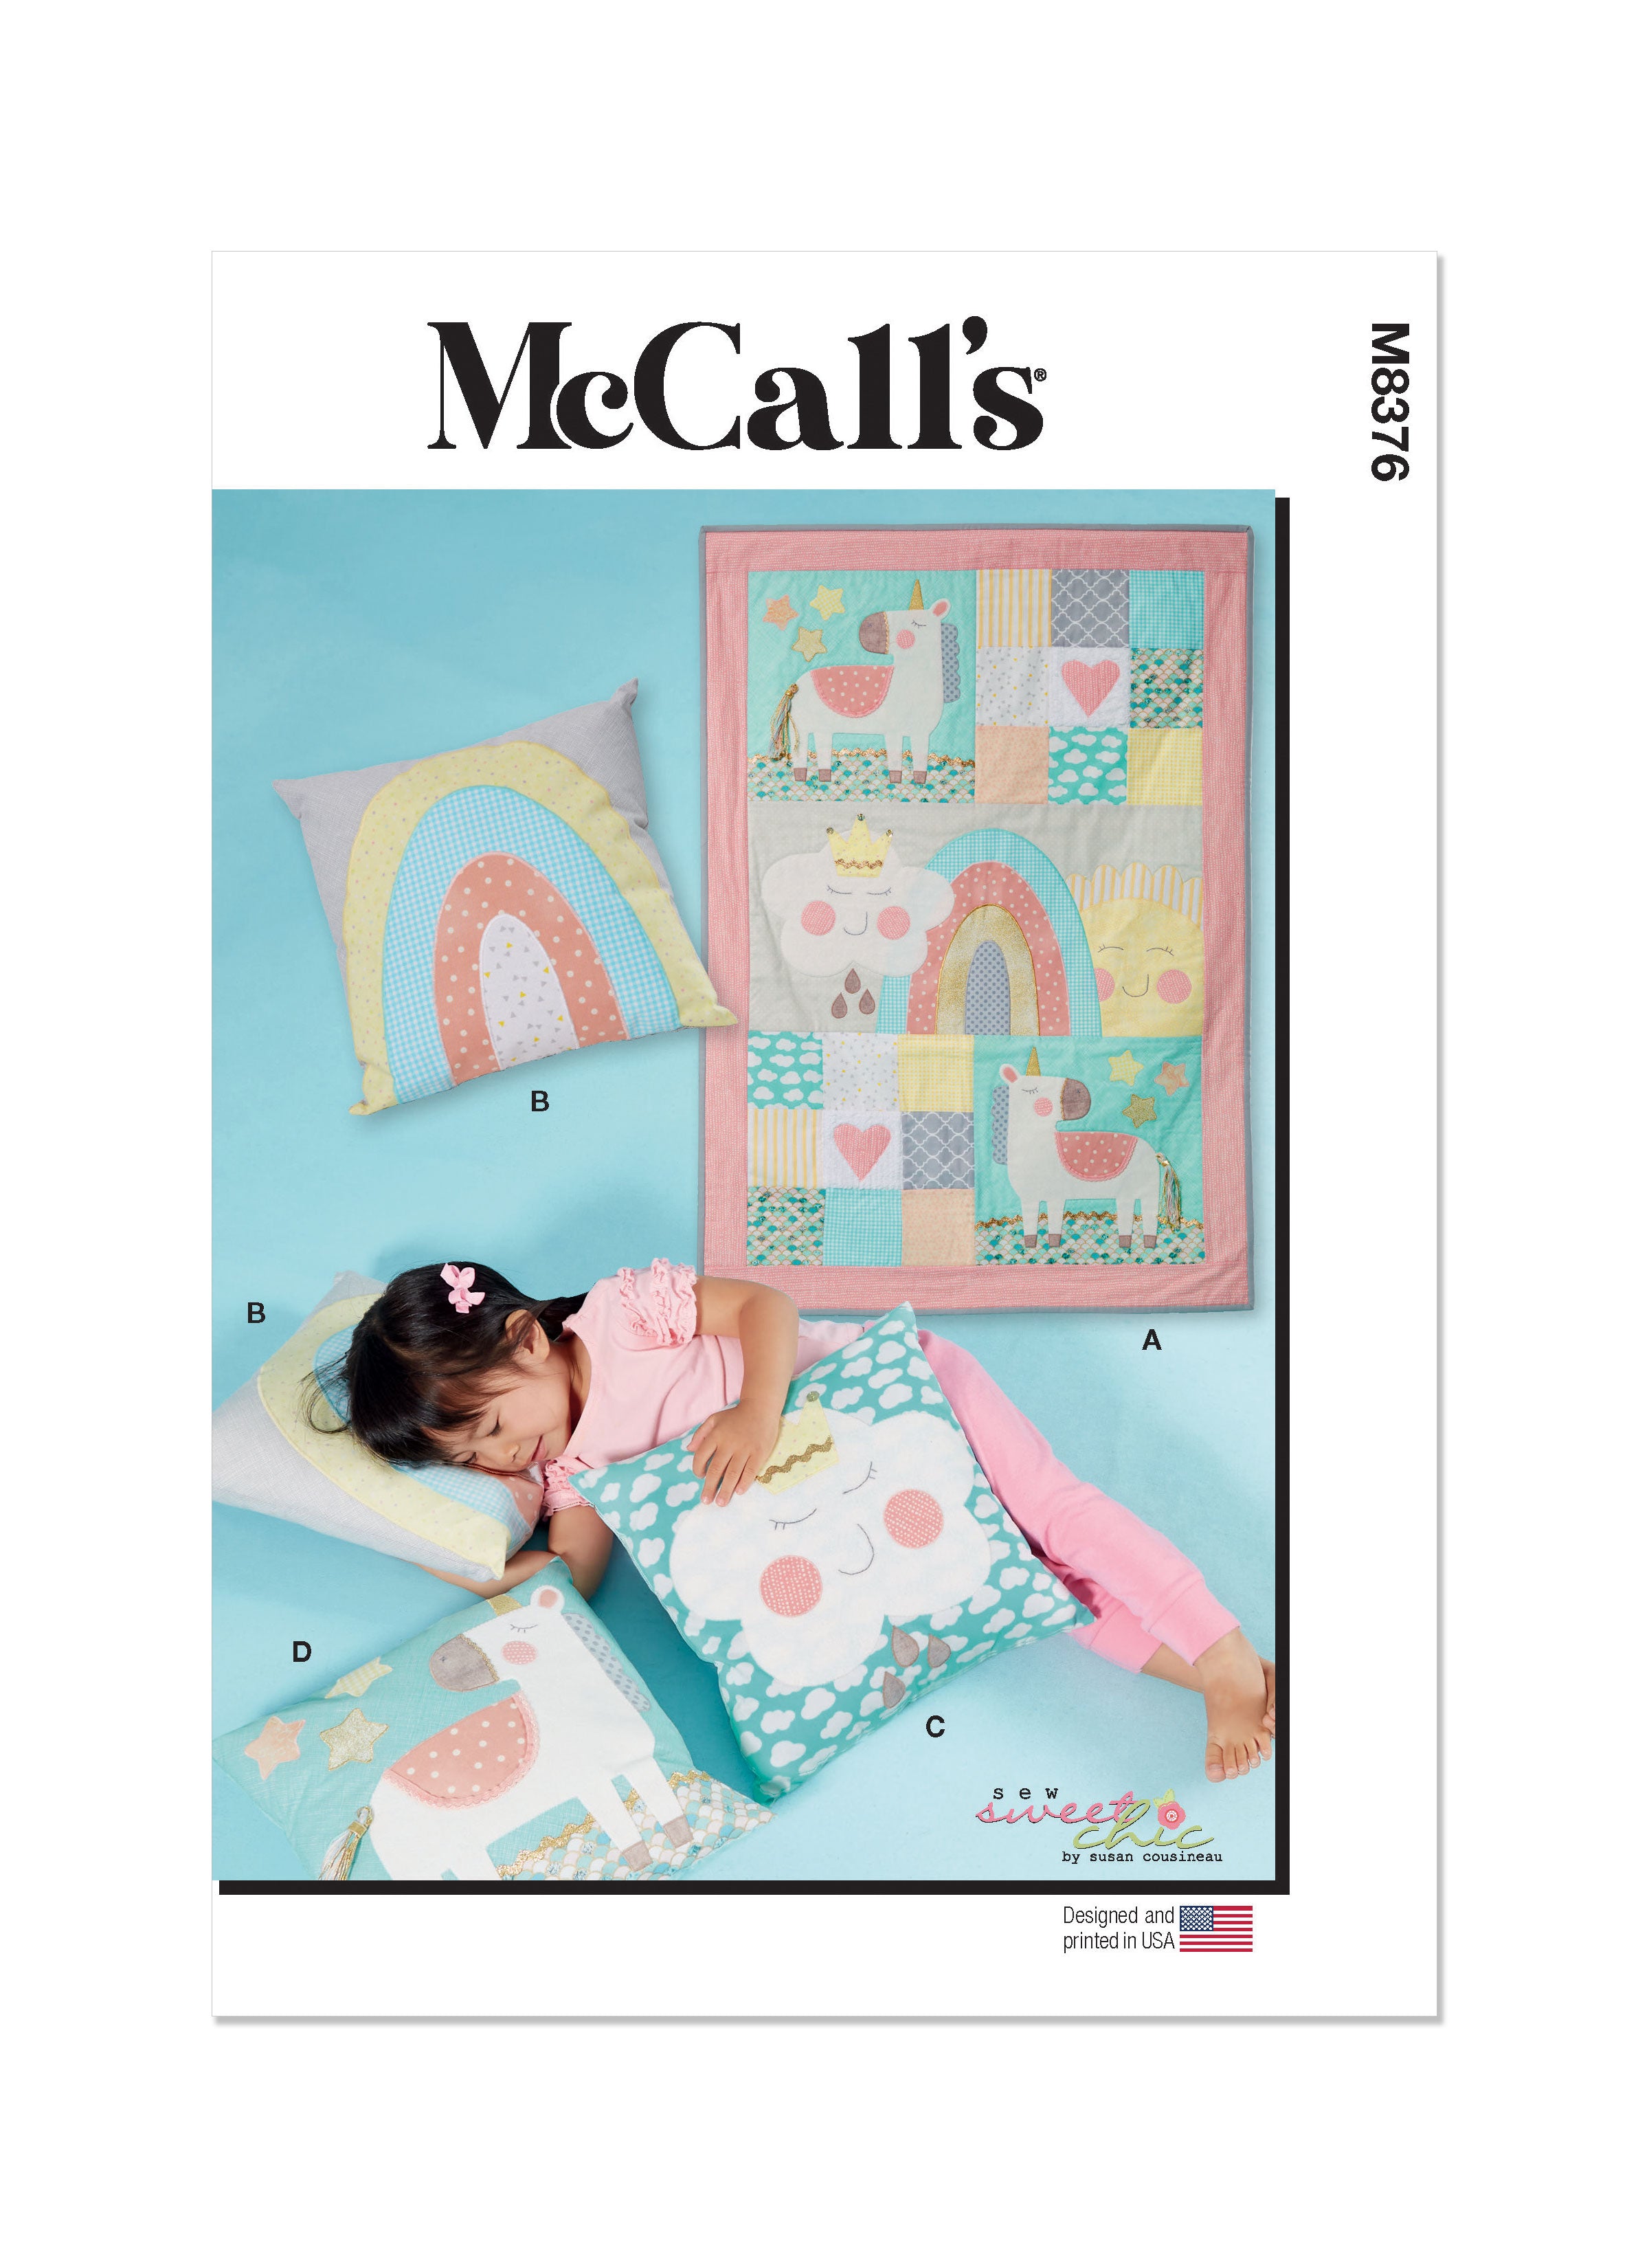 McCall's Sewing Pattern 8376 Quilt or Wall Hanging and Pillows from Jaycotts Sewing Supplies